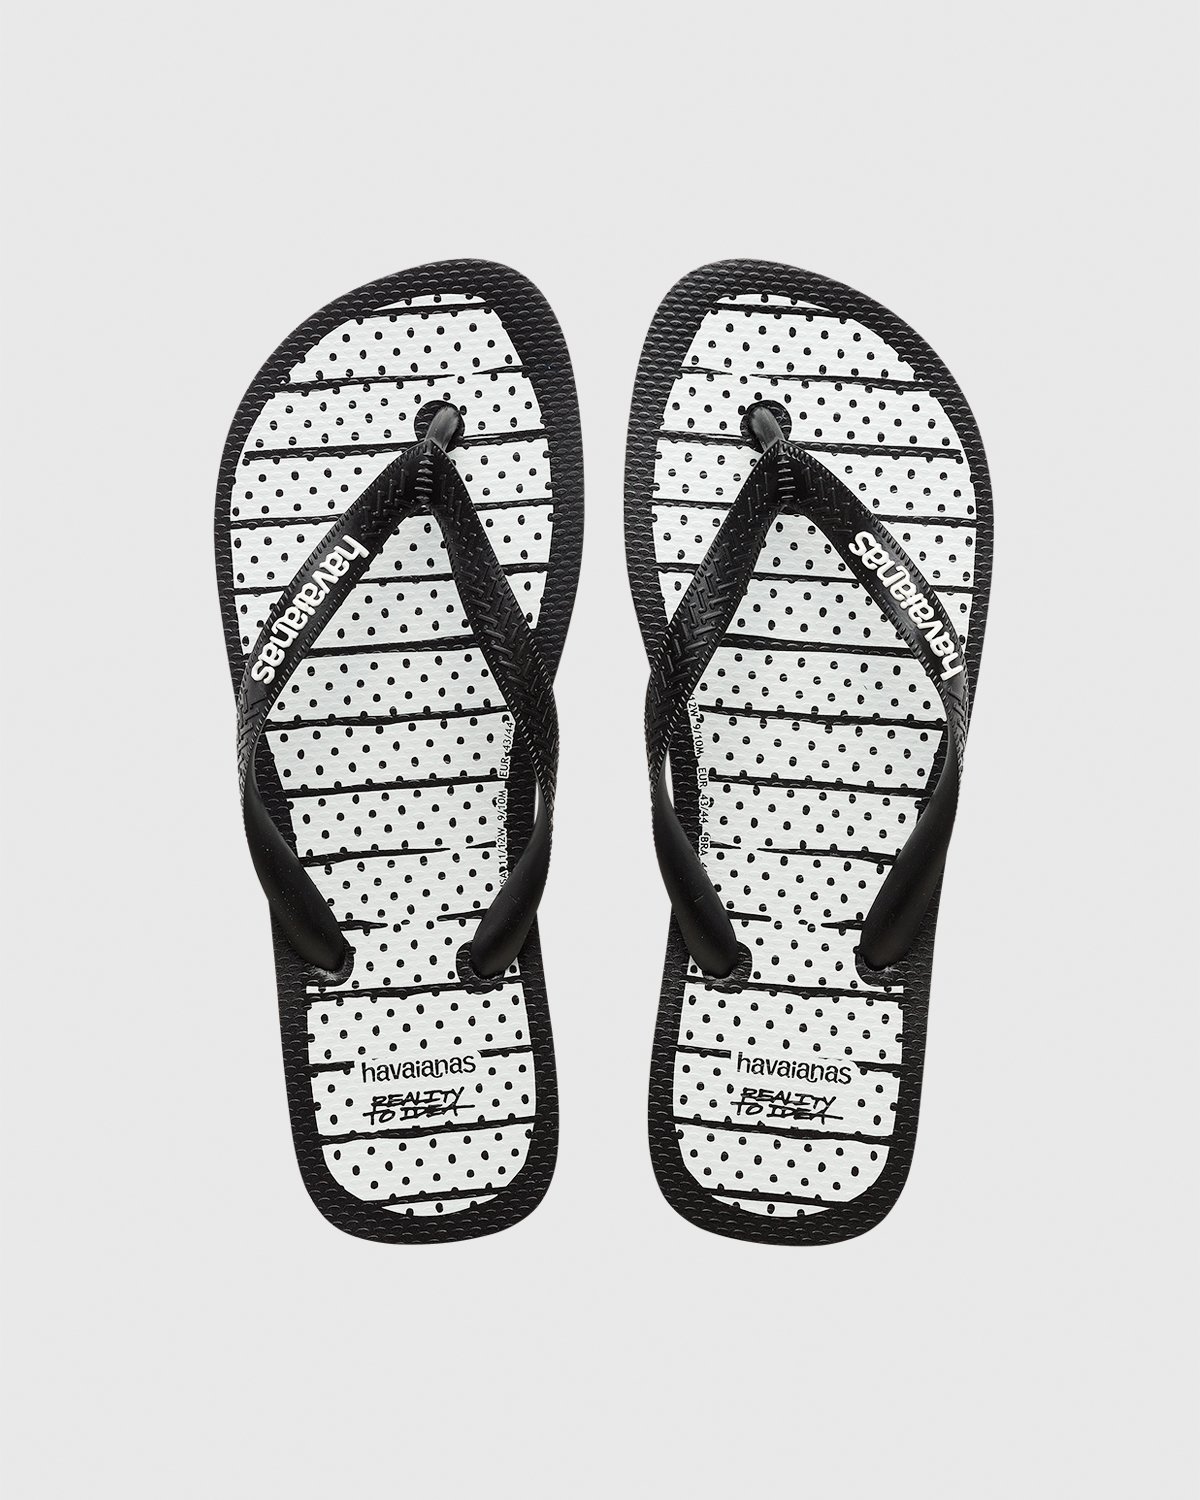 havaianas - Reality to Idea by Joshuas Vides Top White - Footwear - White - Image 3